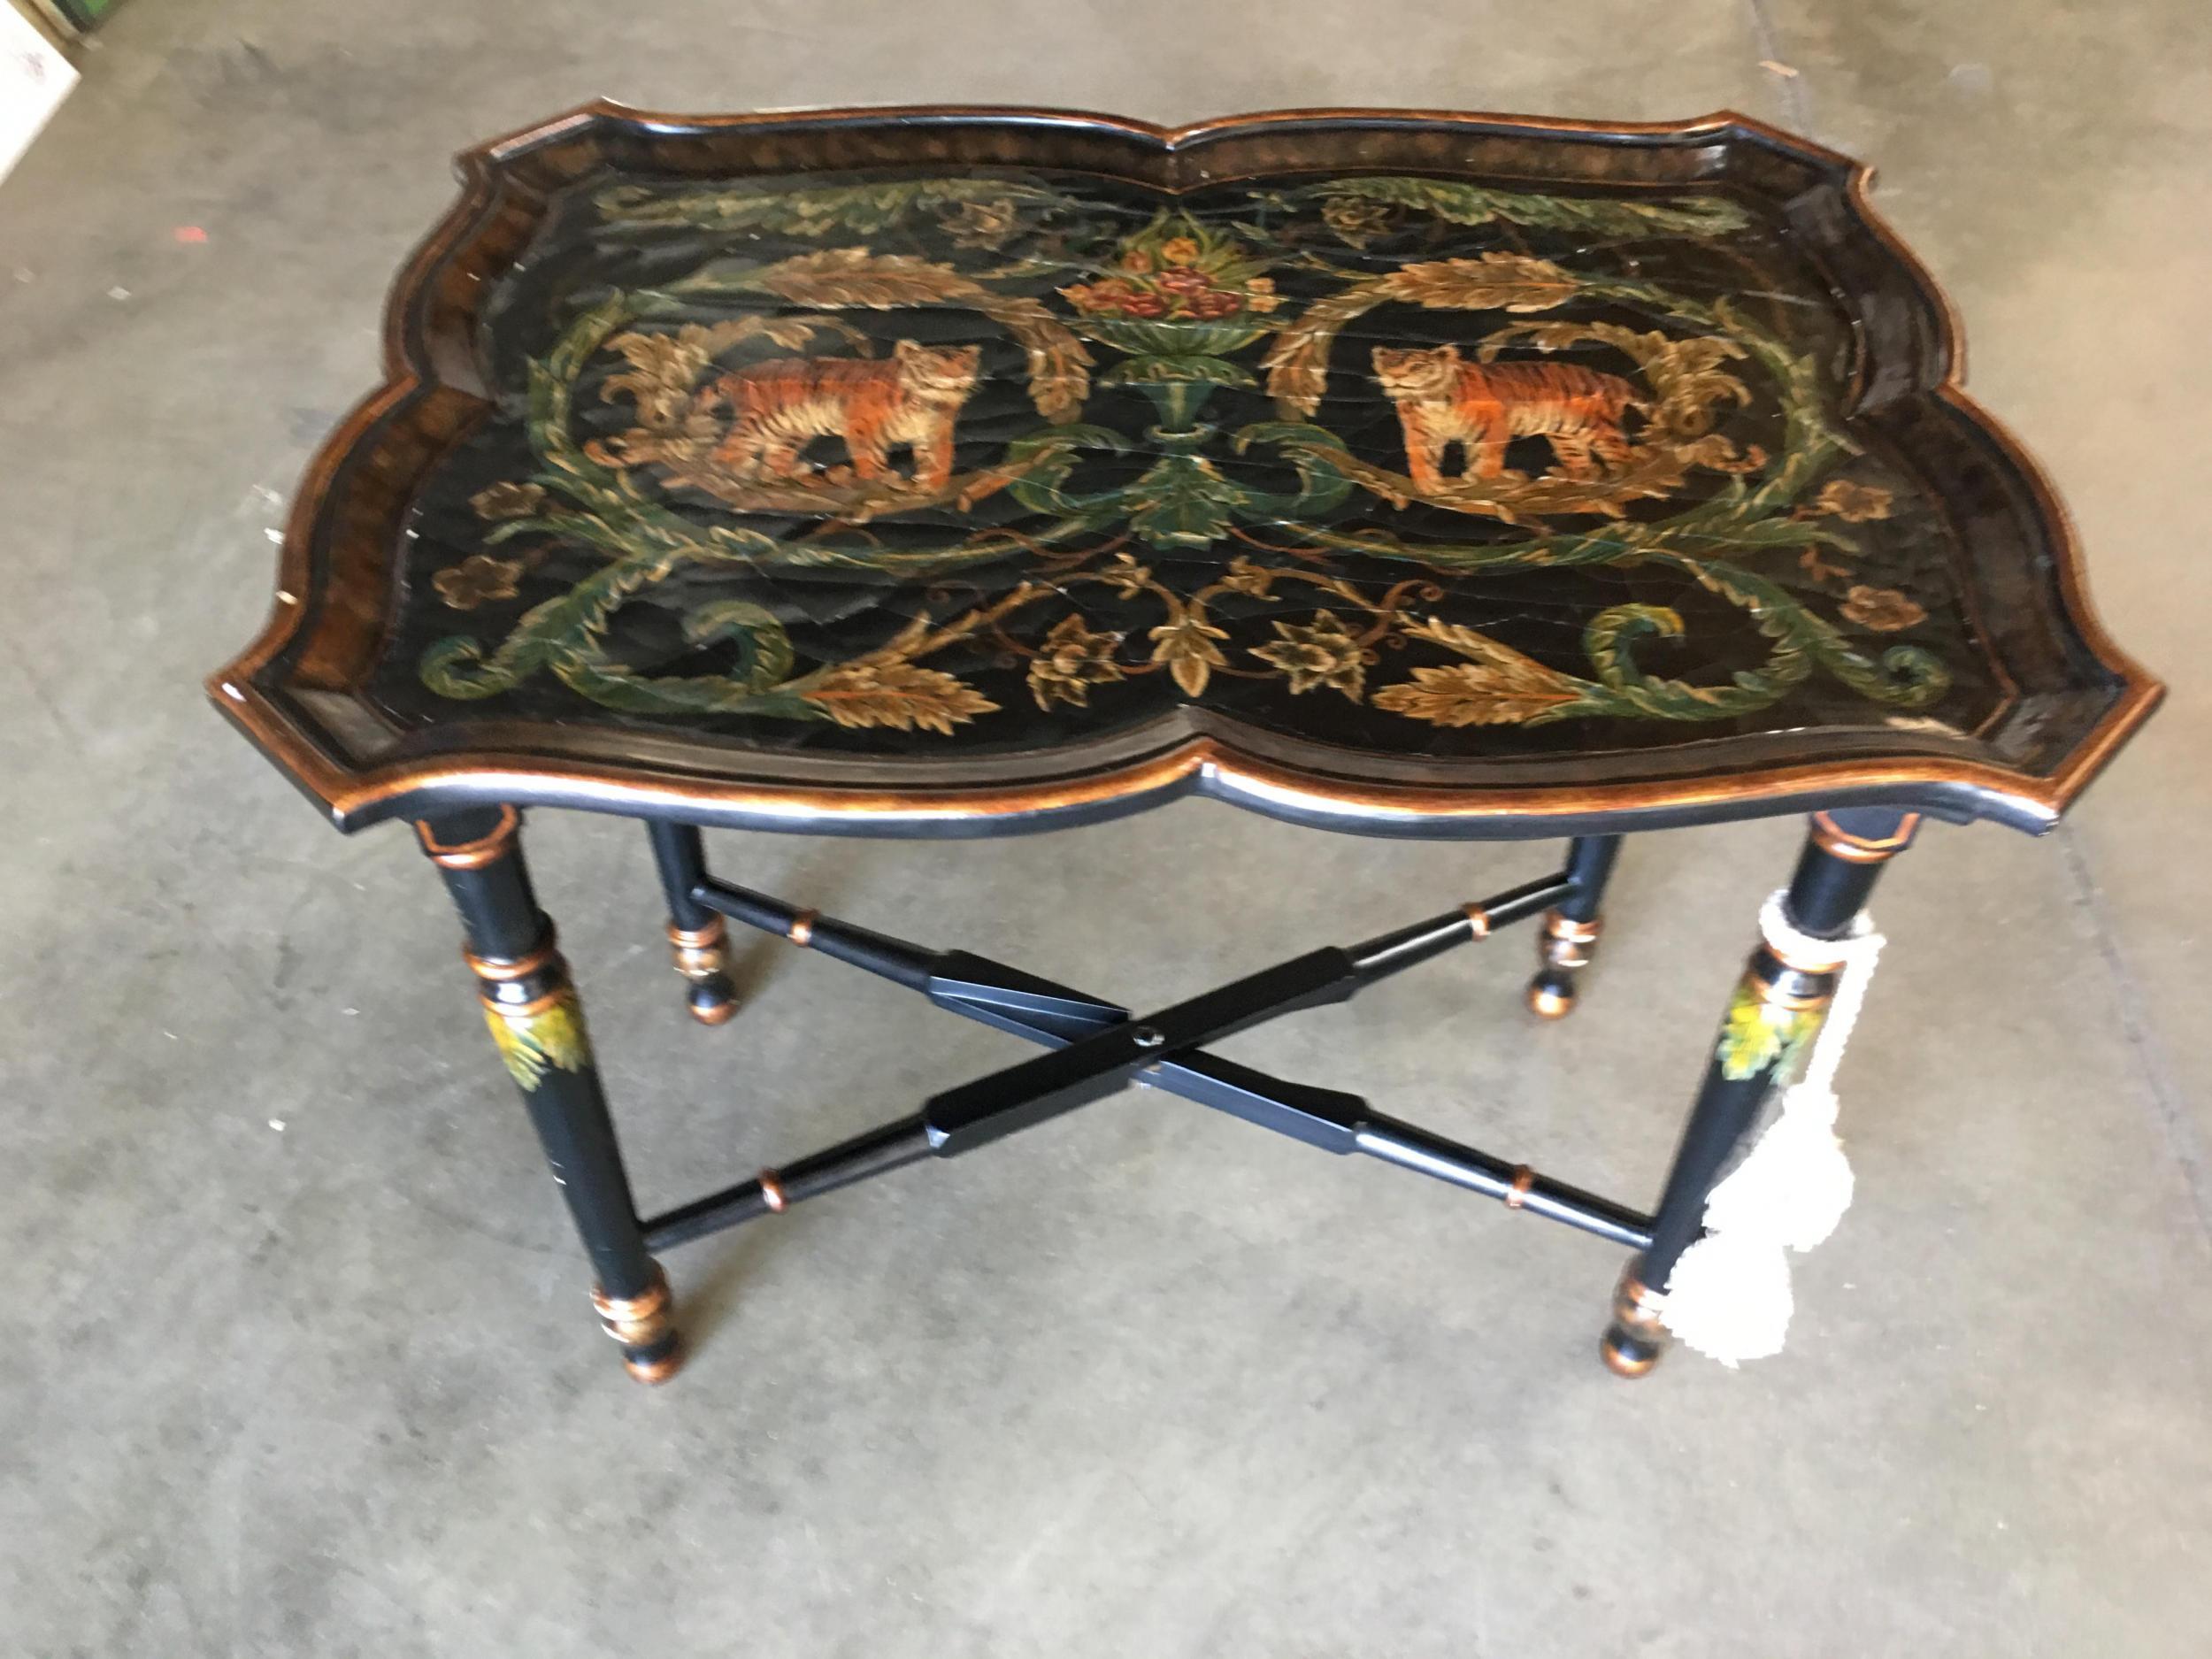 Aesthetic Movement Black Carved Wood Tray Table and Stand with Tiger Motif